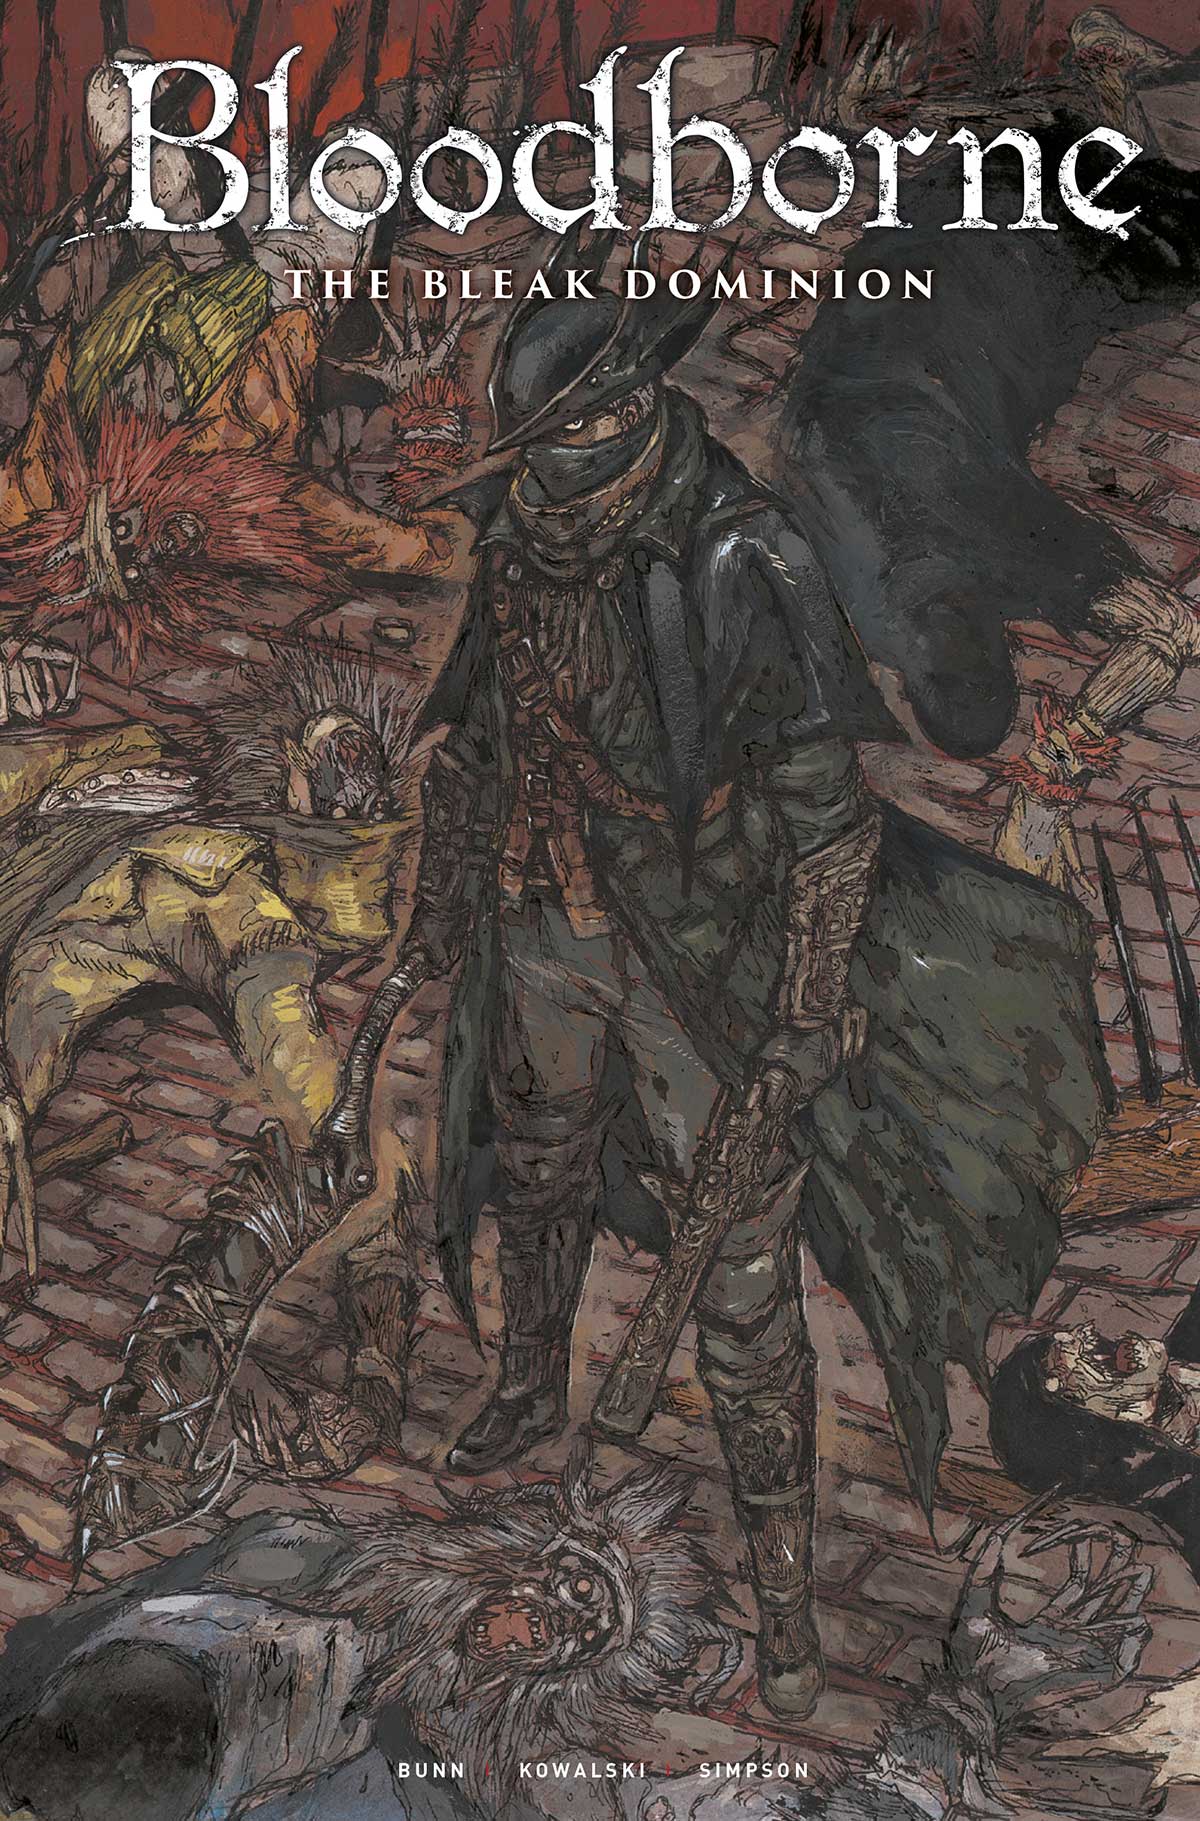 Bloodborne: The Bleak Dominion Is a New Comic Book Adaptation